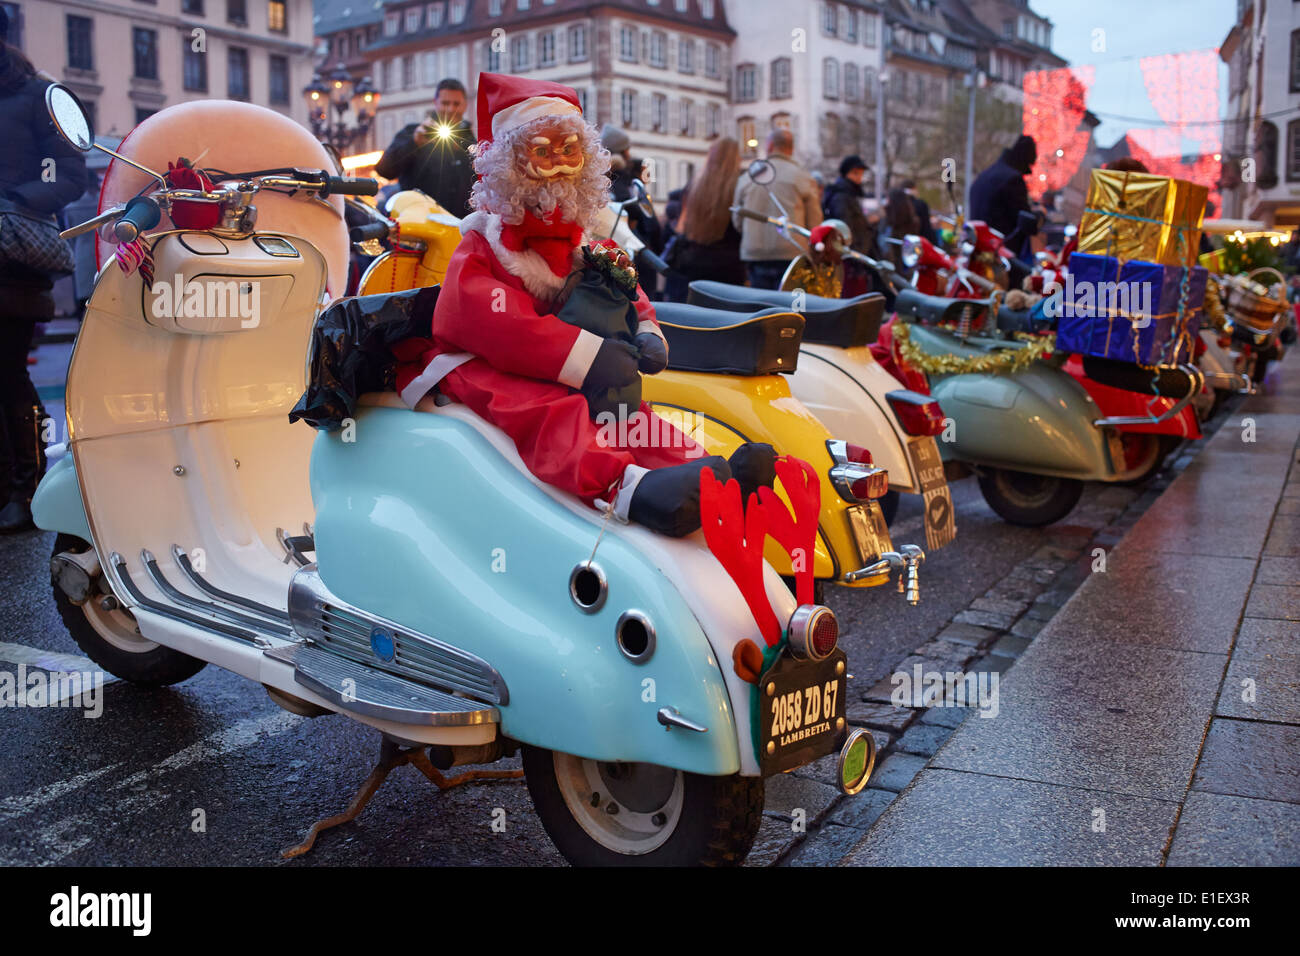 Motor scooter with Santa Claus sitting on top Stock Photo